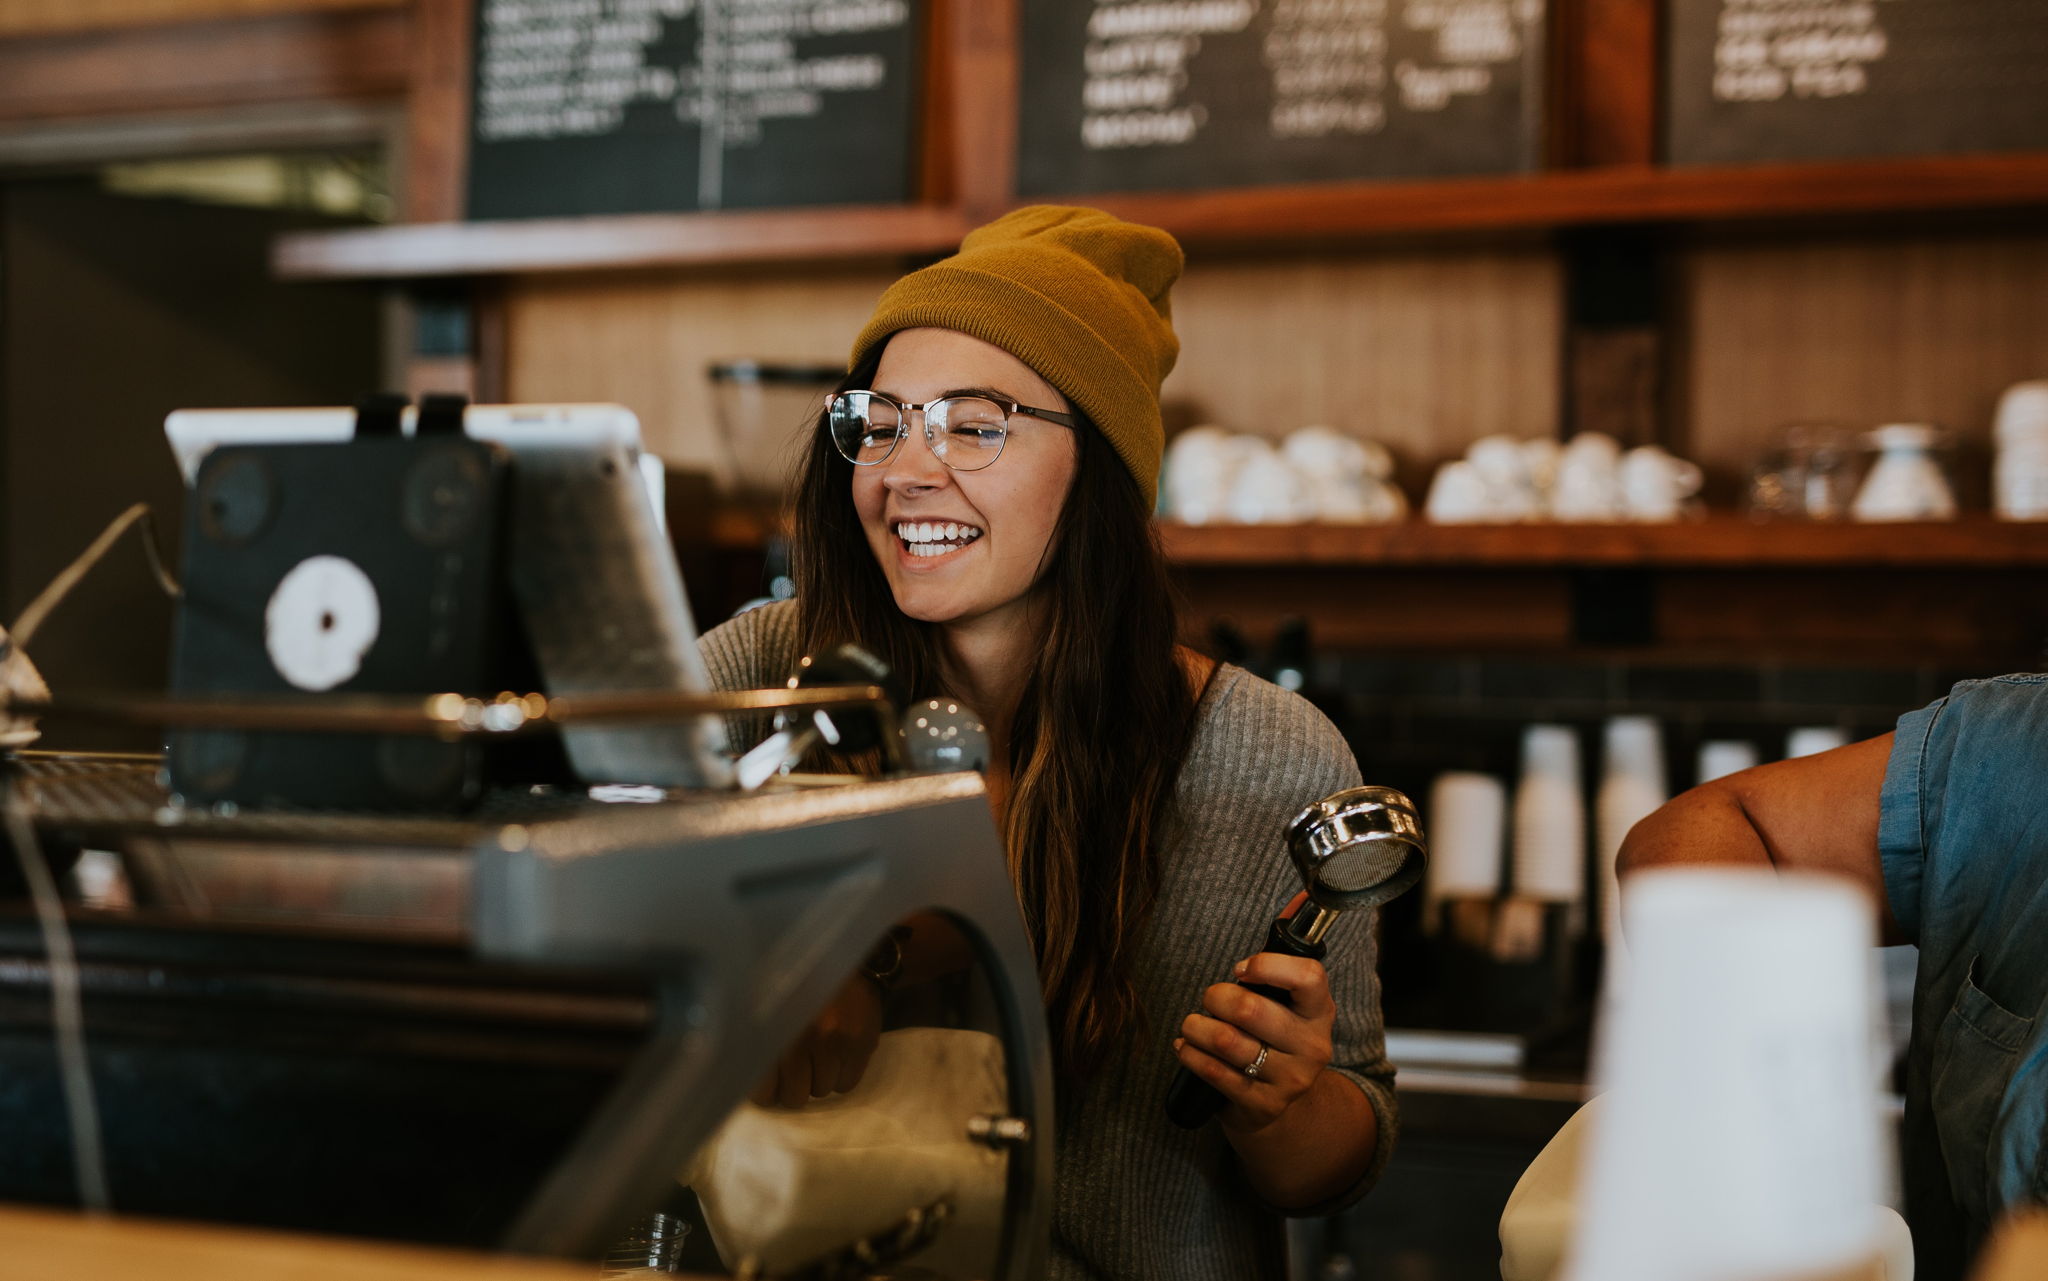 Image of a hipster girl wearing glasses and a beanie working at a coffee shop making espresso and smiling.